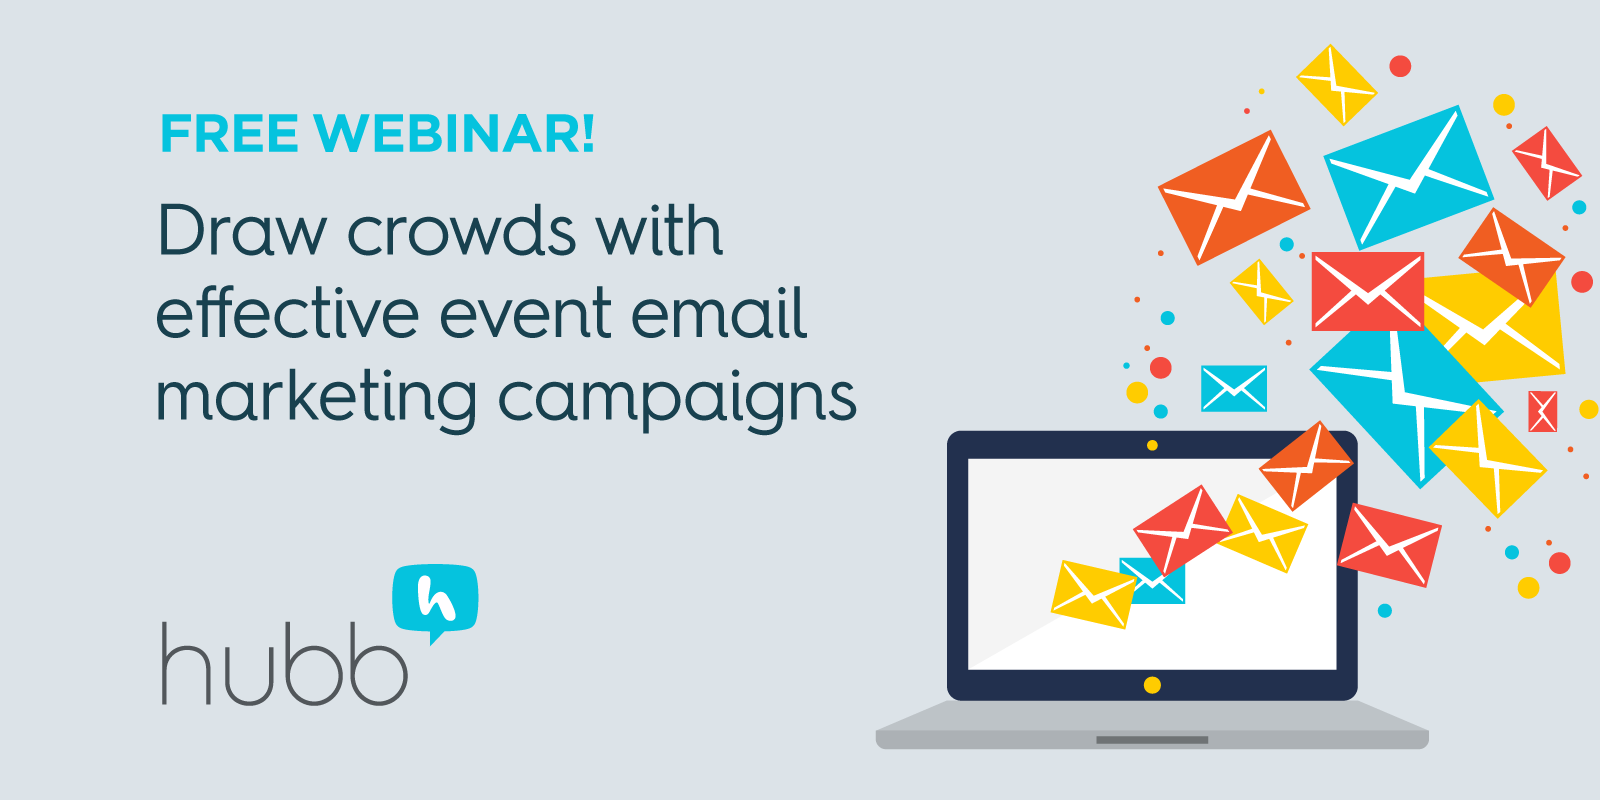 [Webinar] Draw crowds with effective event email marketing